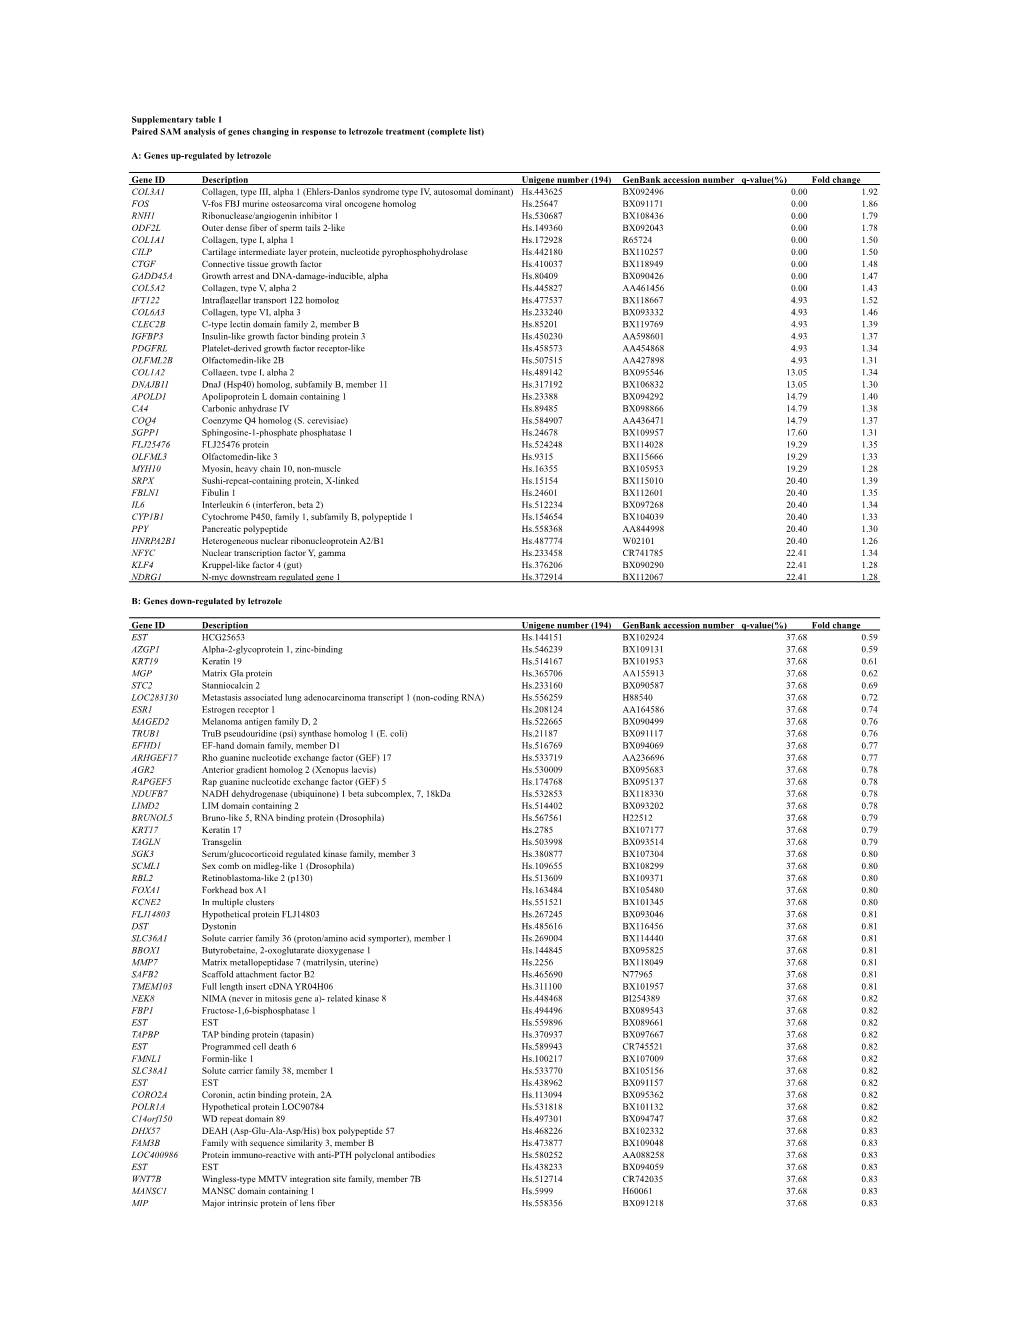 Supplementary Table 1 Paired SAM Analysis of Genes Changing in Response to Letrozole Treatment (Complete List)